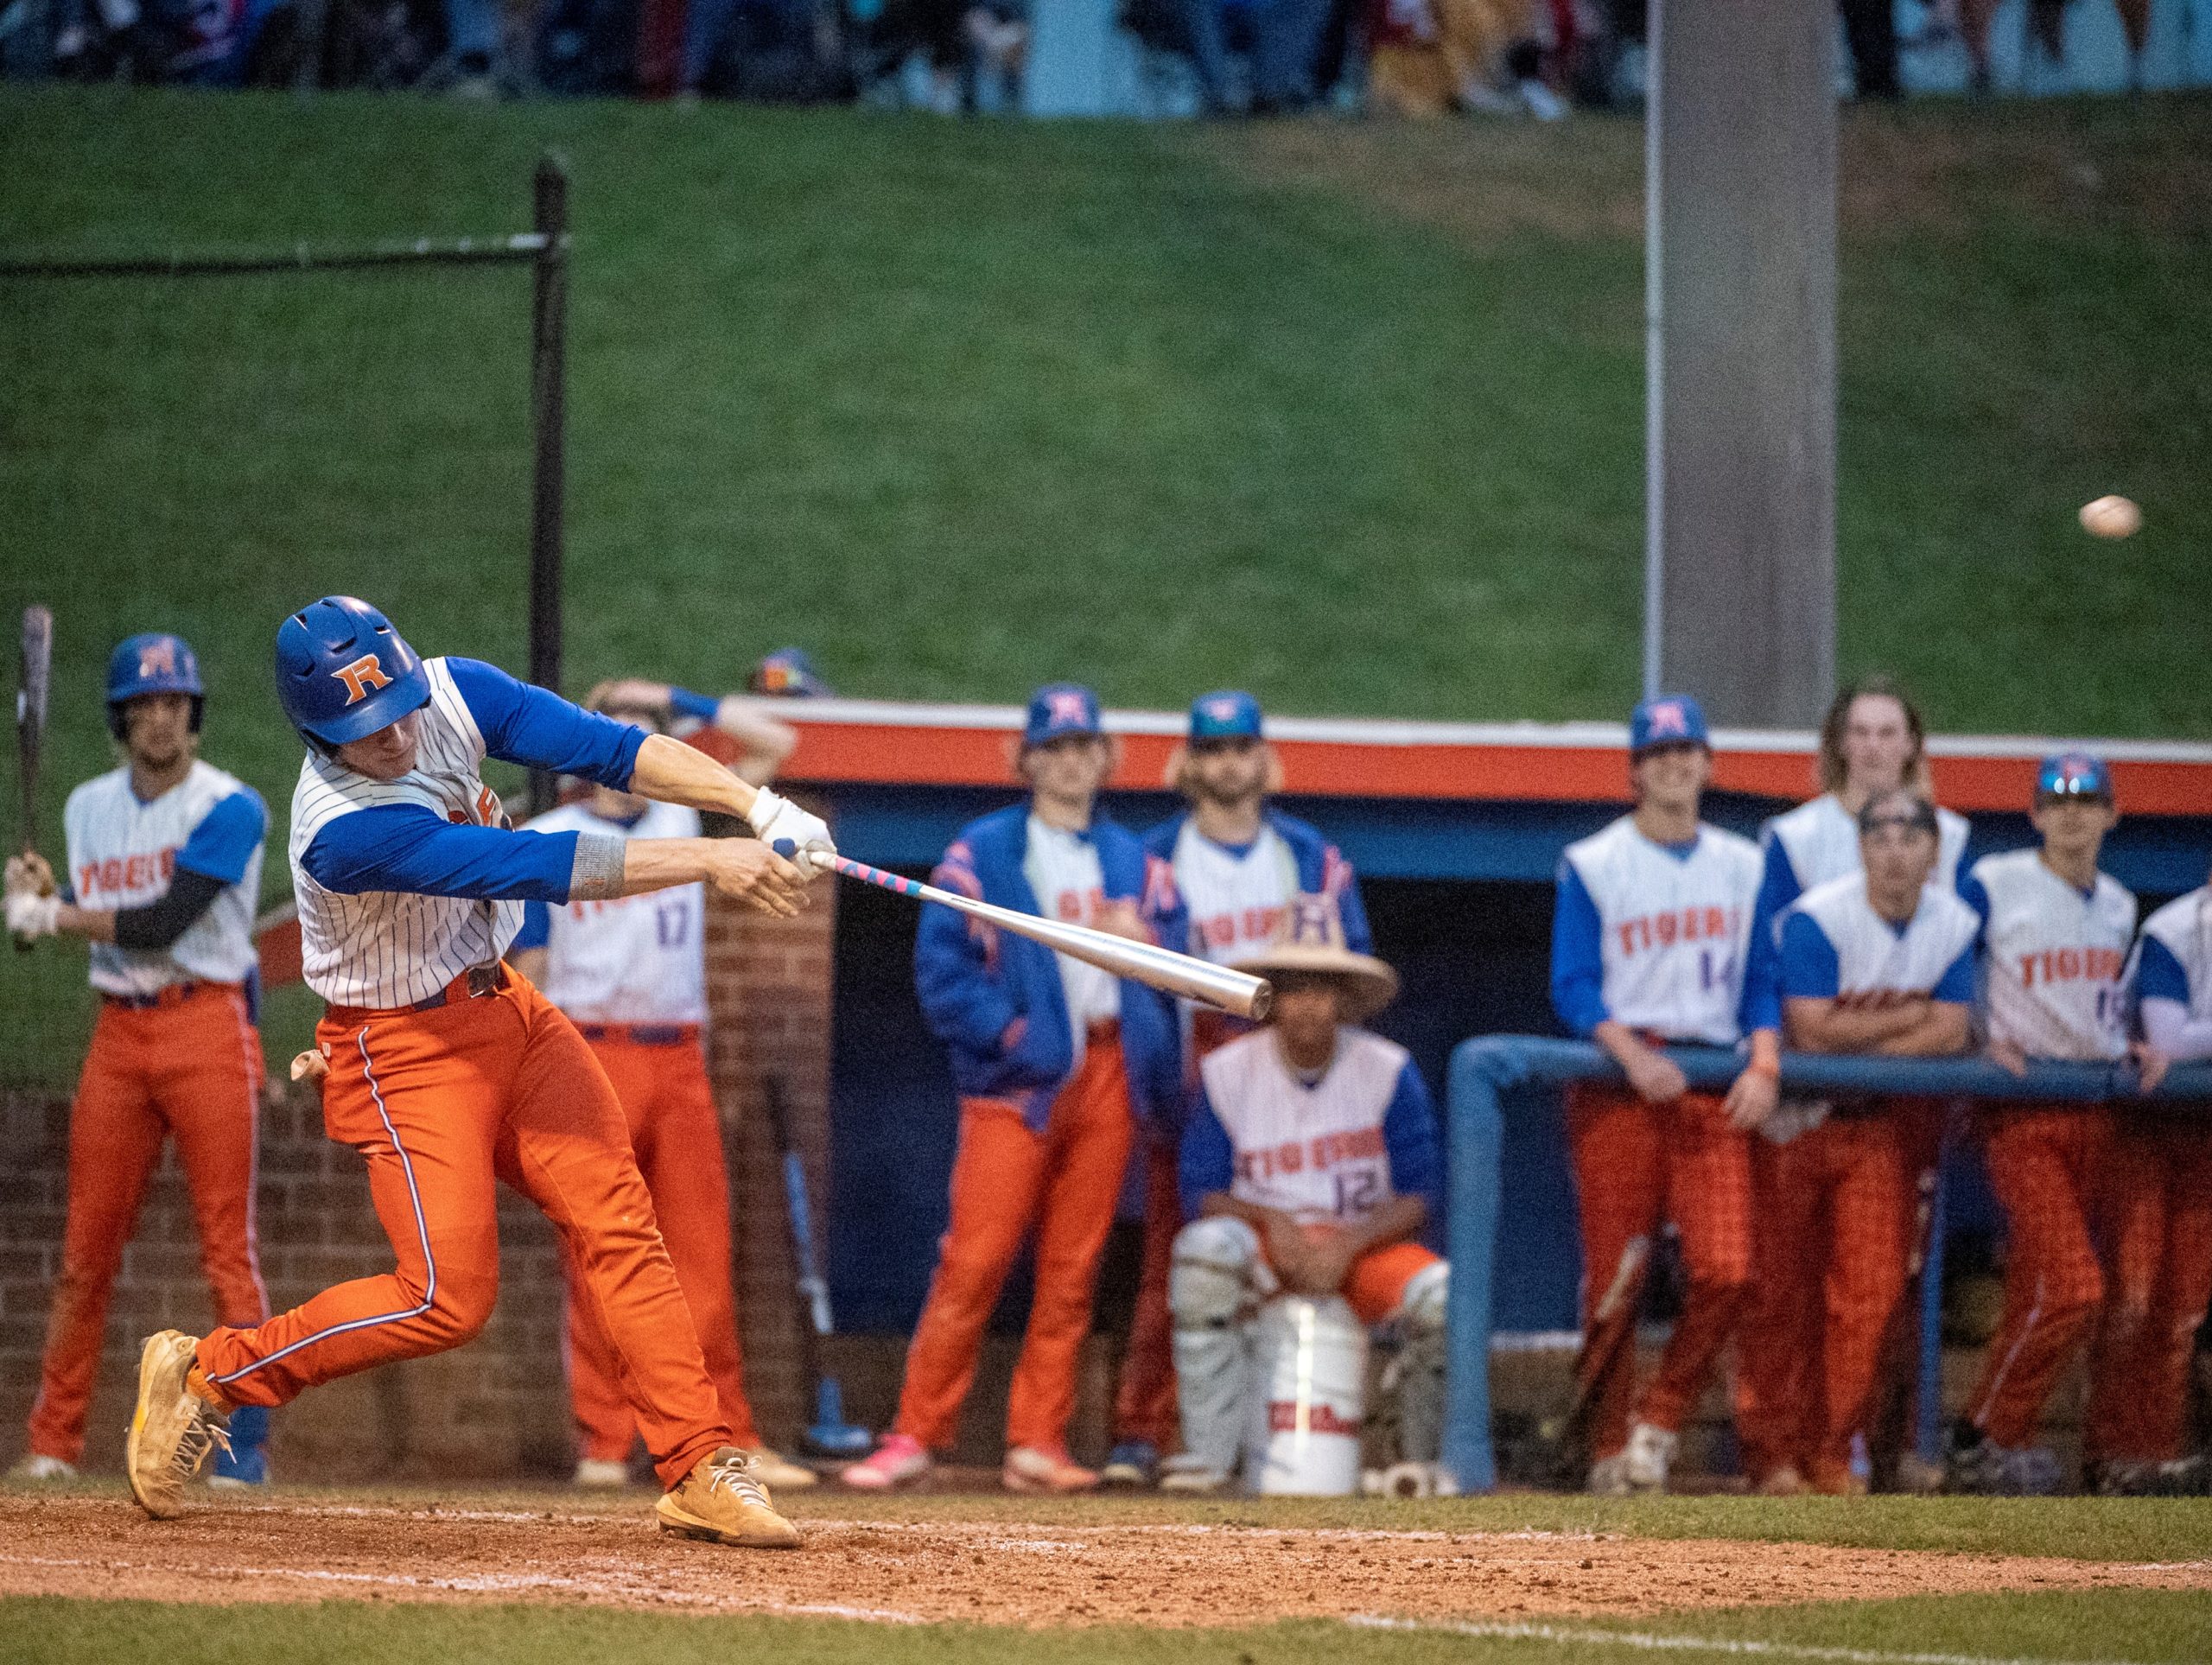 Randleman's Brannon bashes two homers, ties state record held by